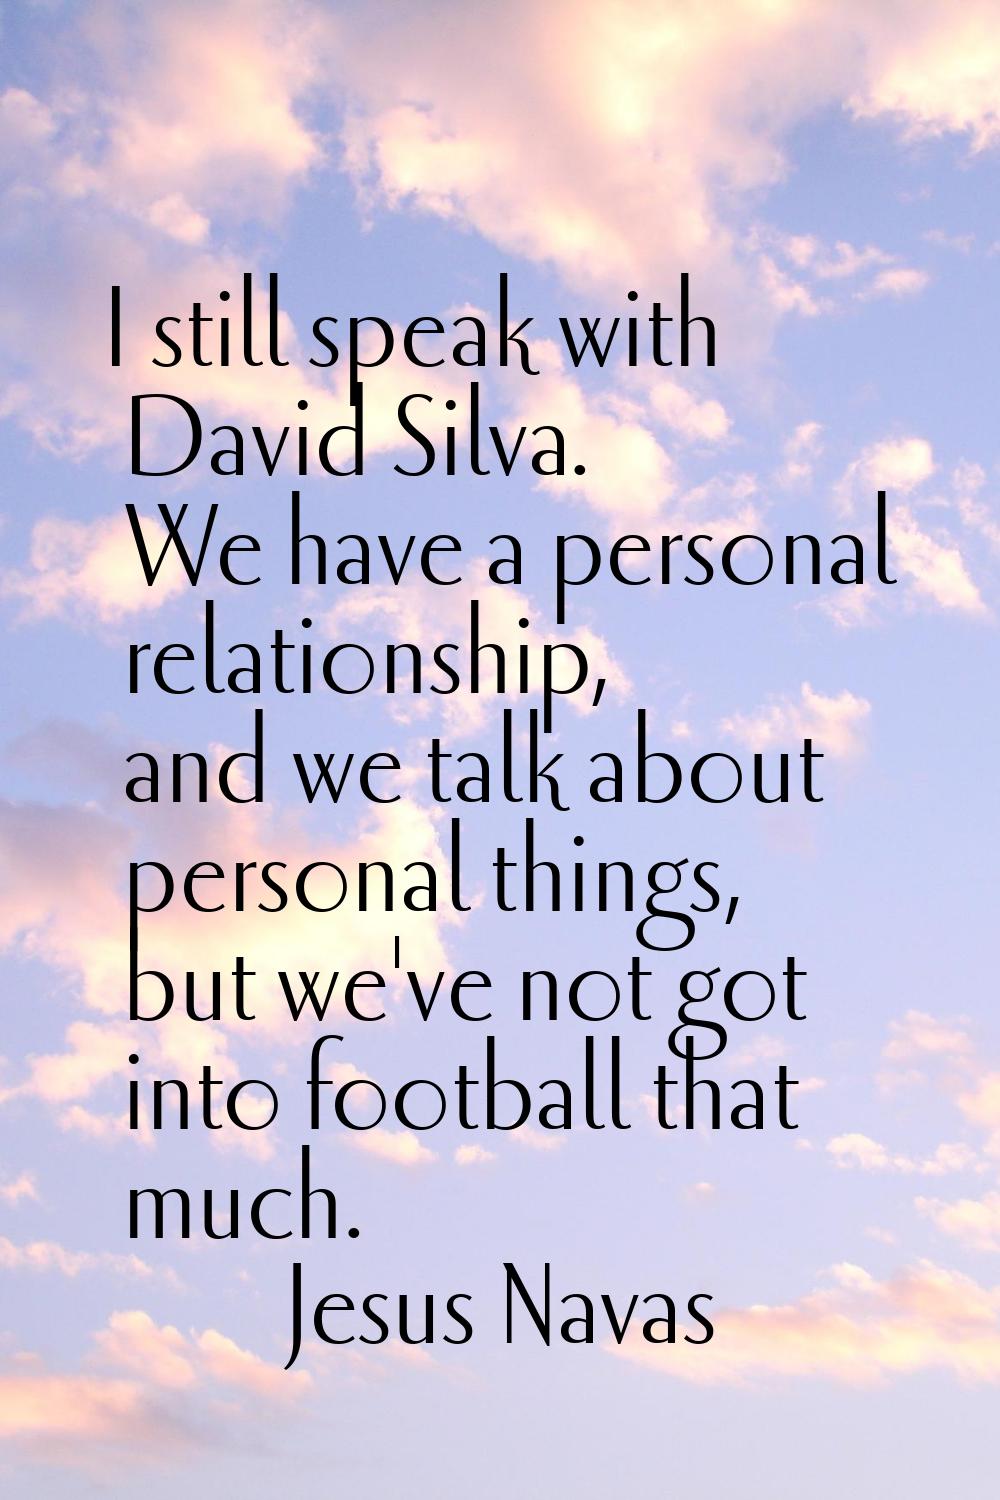 I still speak with David Silva. We have a personal relationship, and we talk about personal things,